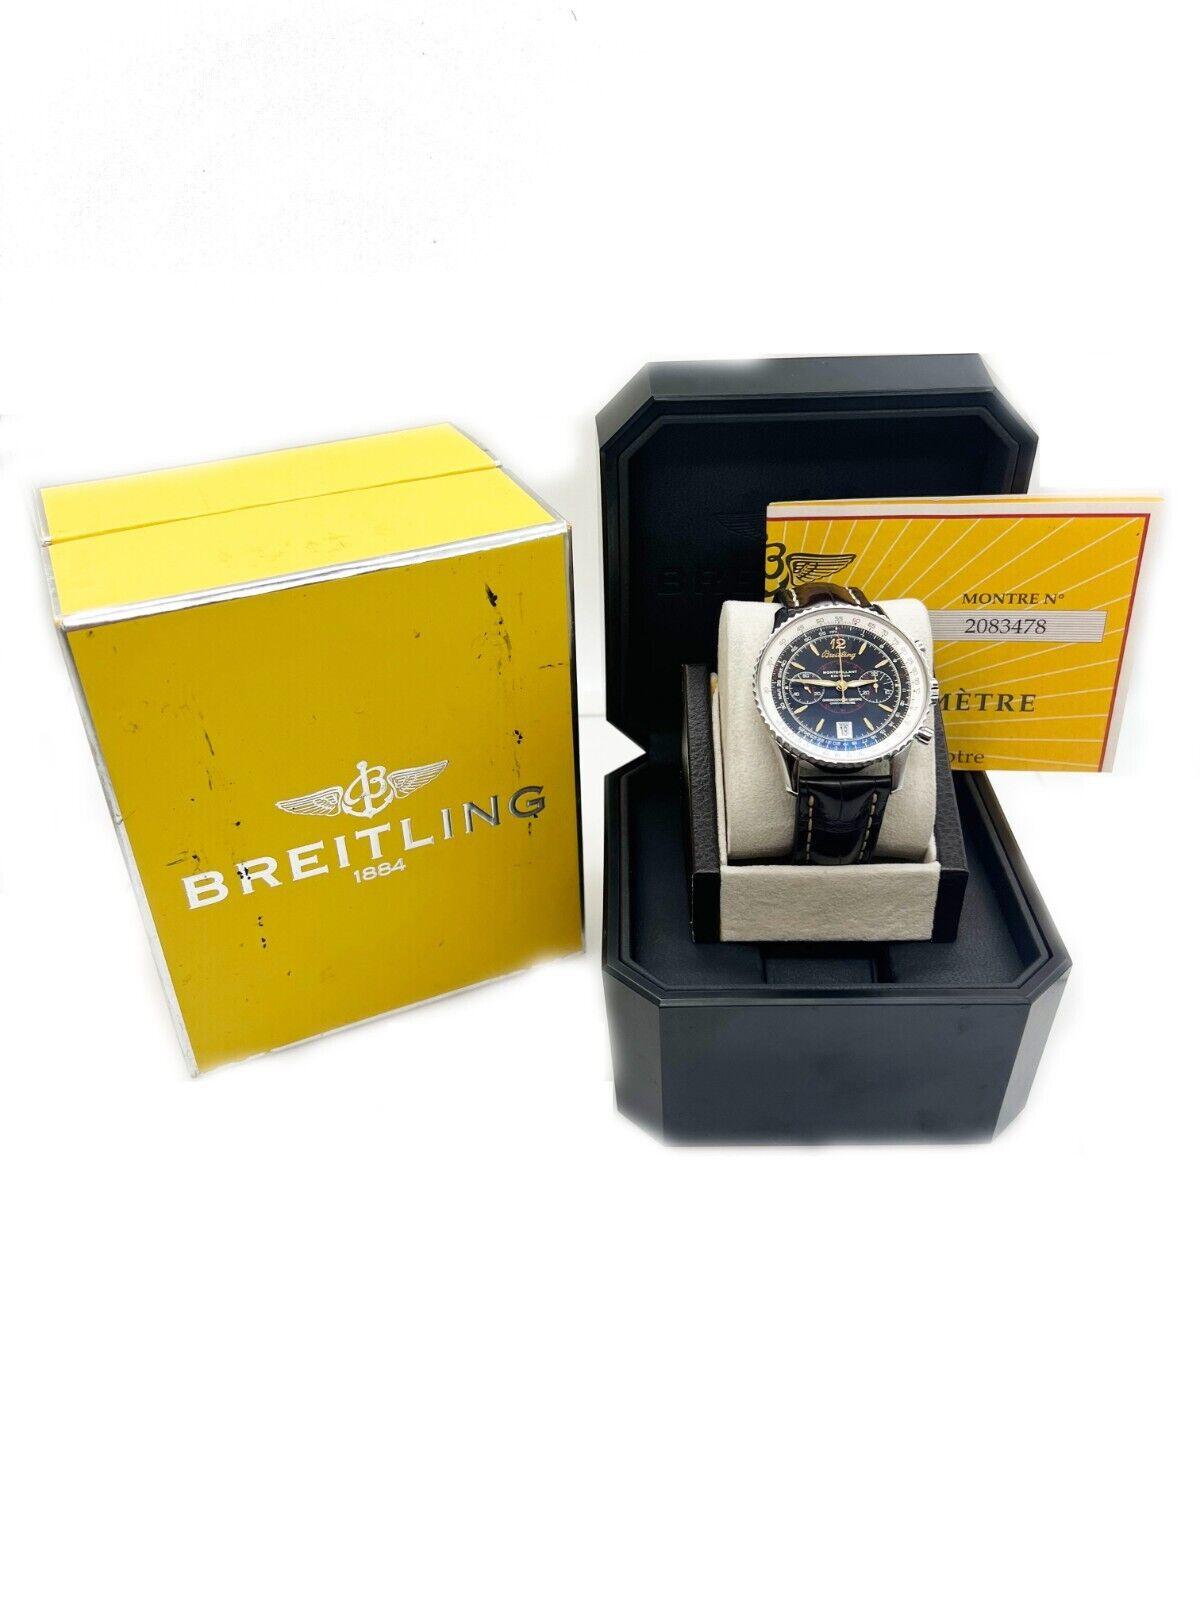 Breitling A48330 Montbrillant Chronograph 43mm Stainless Steel Box Paper 2005 In Good Condition For Sale In San Diego, CA